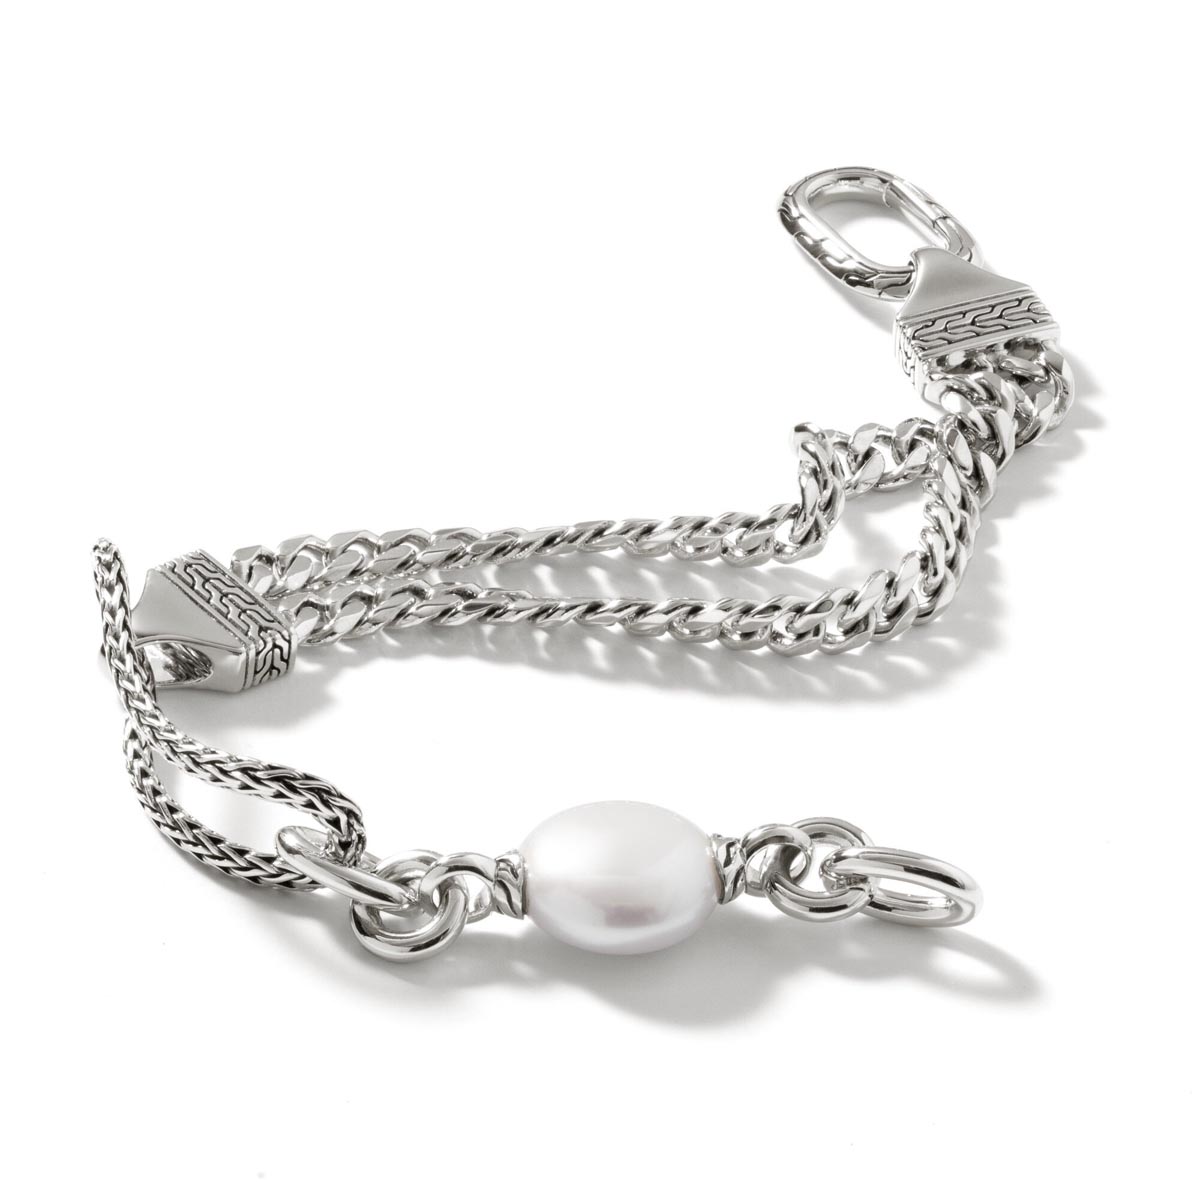 John Hardy Classic Chain Collection Cultured Freshwater Pearl Bracelet in Sterling Silver (13mm pearl)